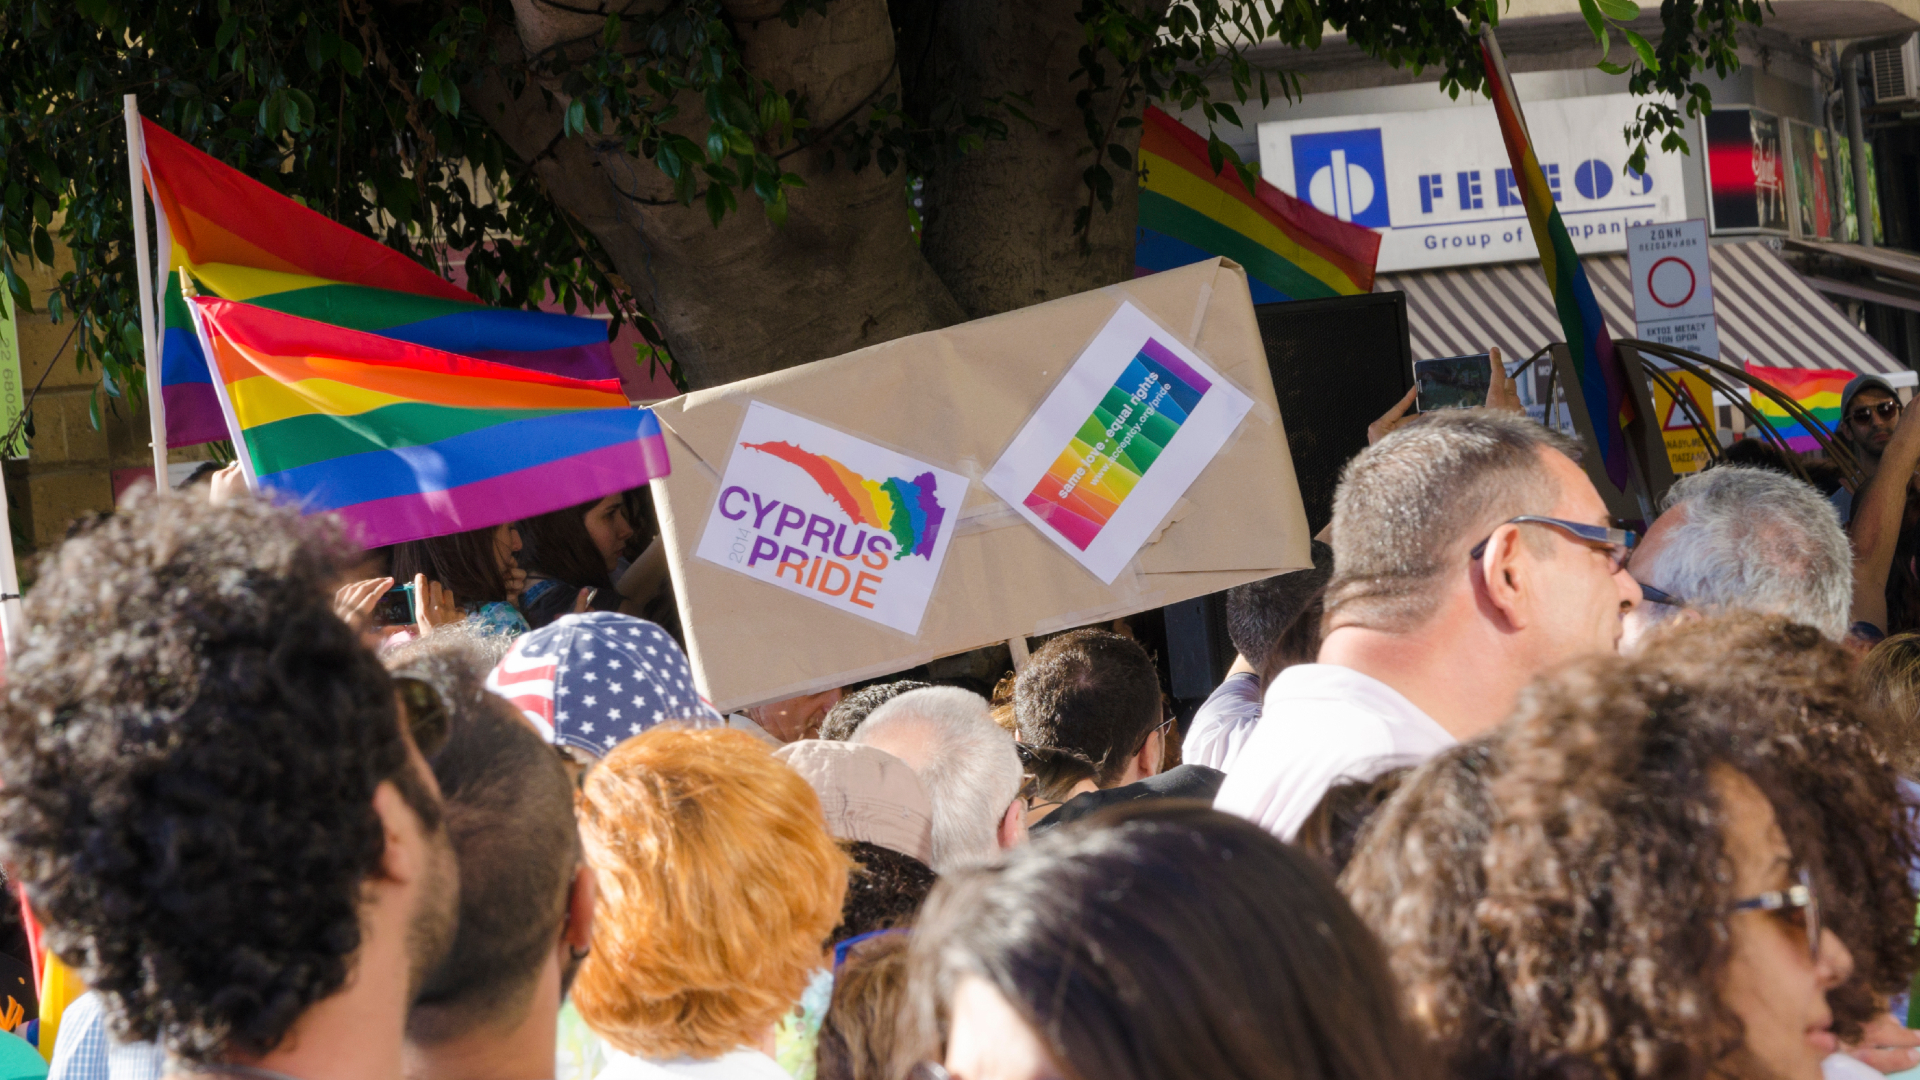 Cyprus: Creating dialogue on LGBTI rights in the Turkish-Cypriot community